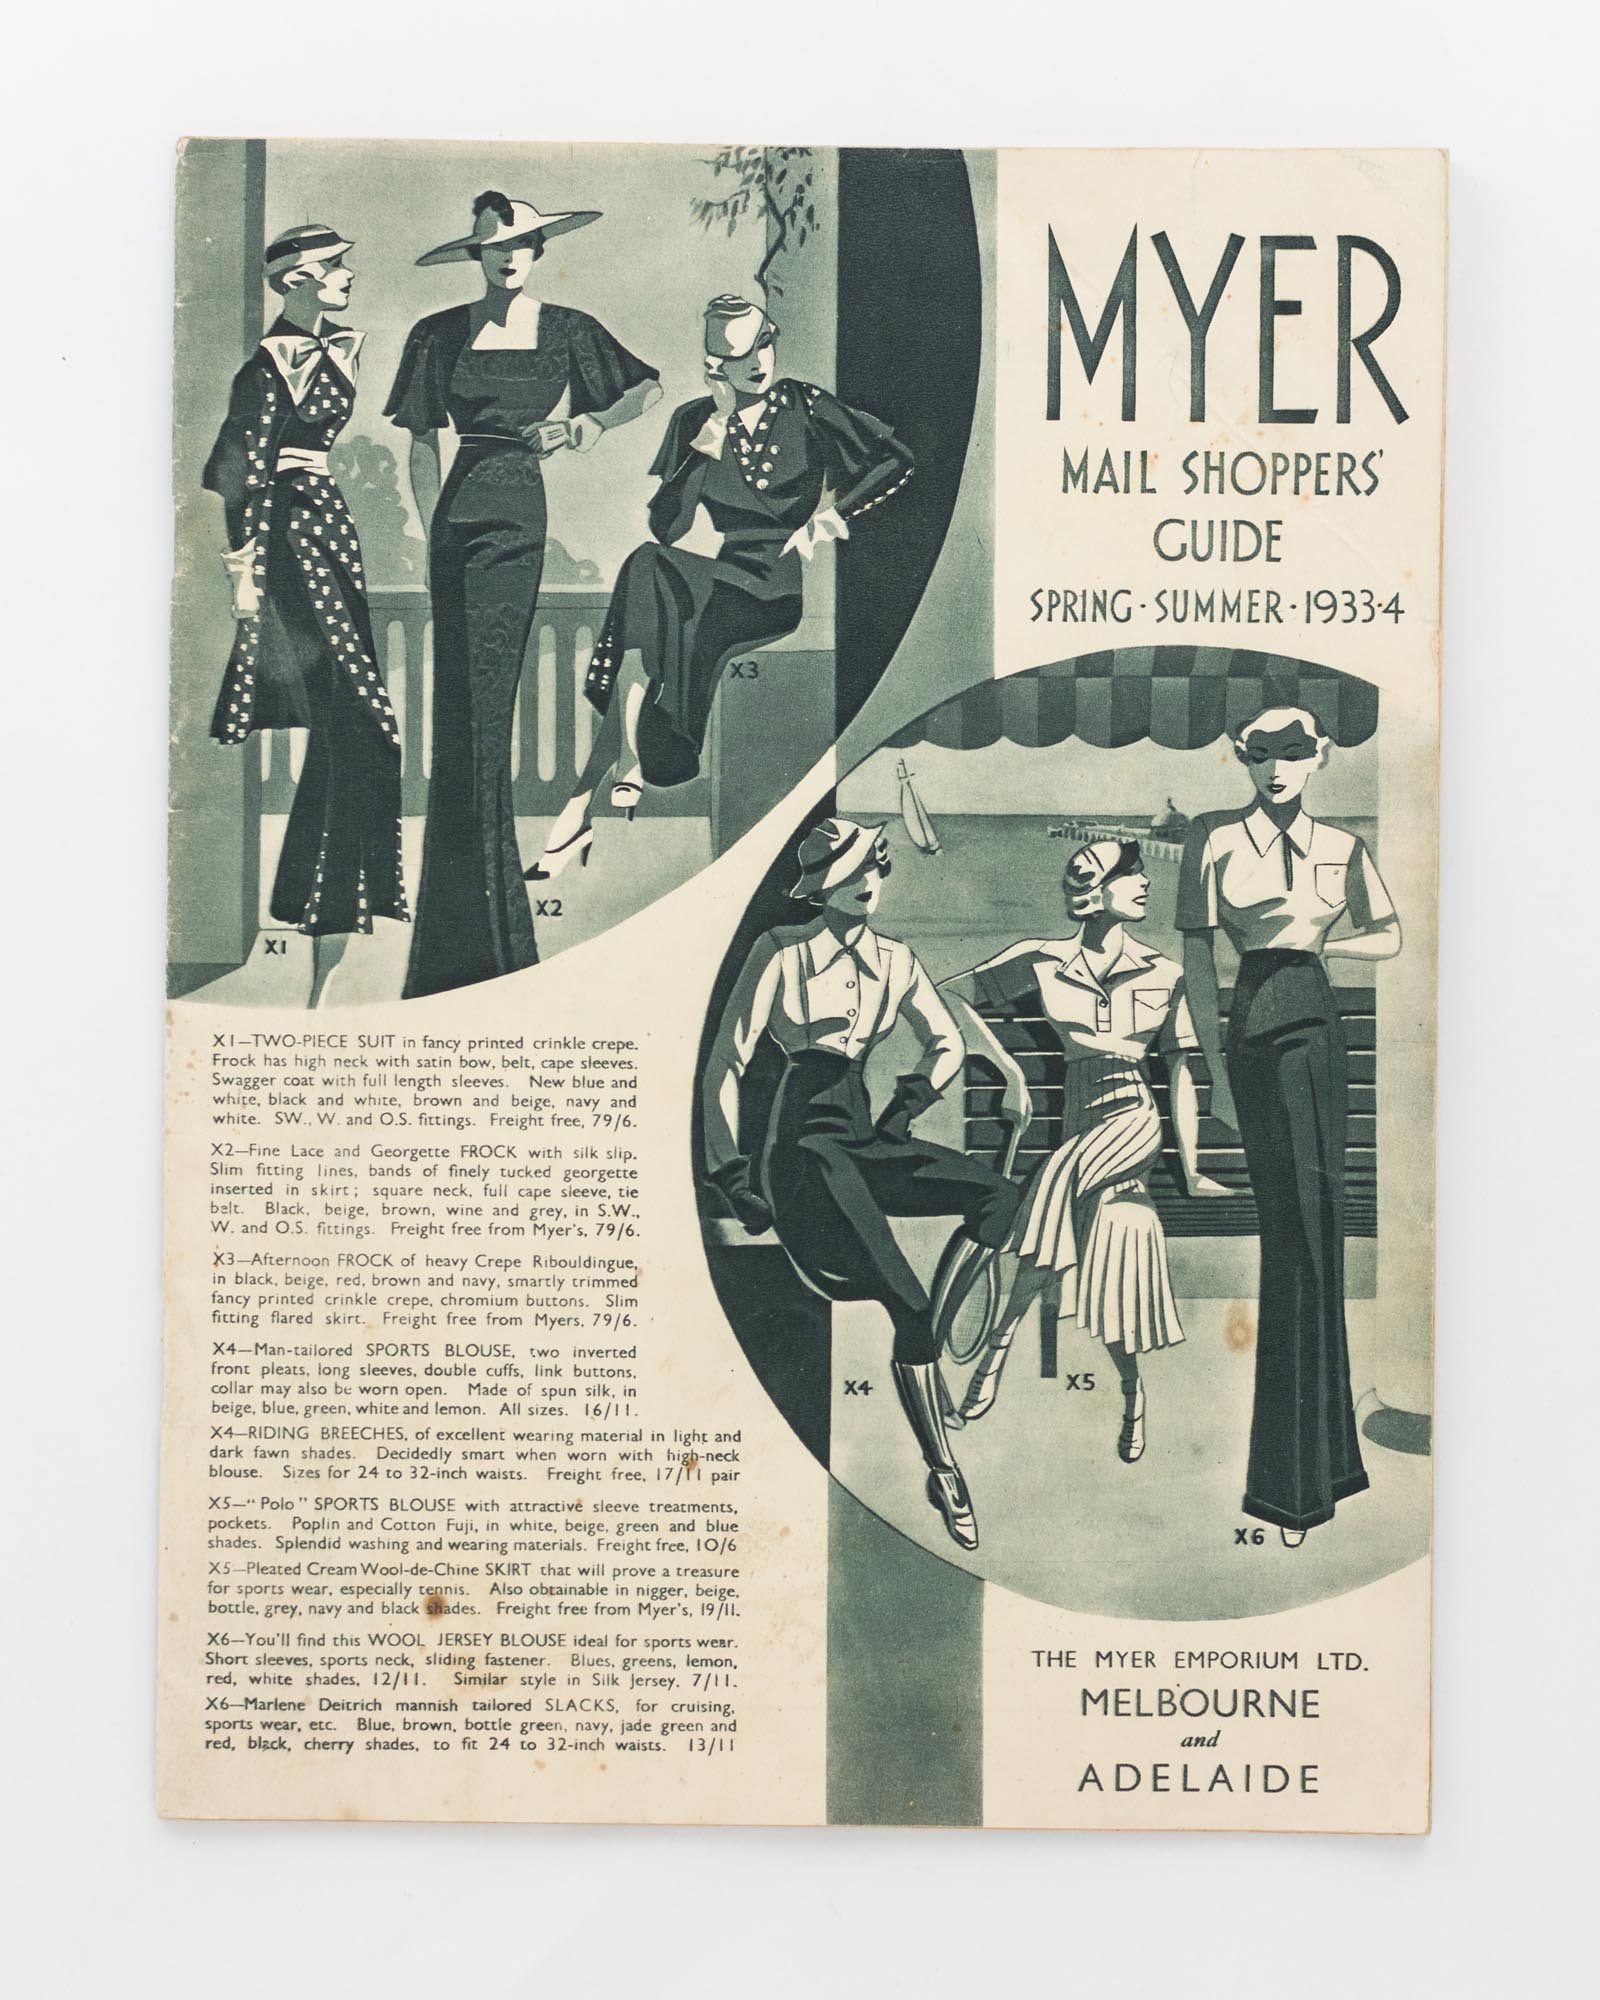 Myer Mail Shoppers' Guide. Spring-Summer, 1933-4 cover title, Trade  Catalogue